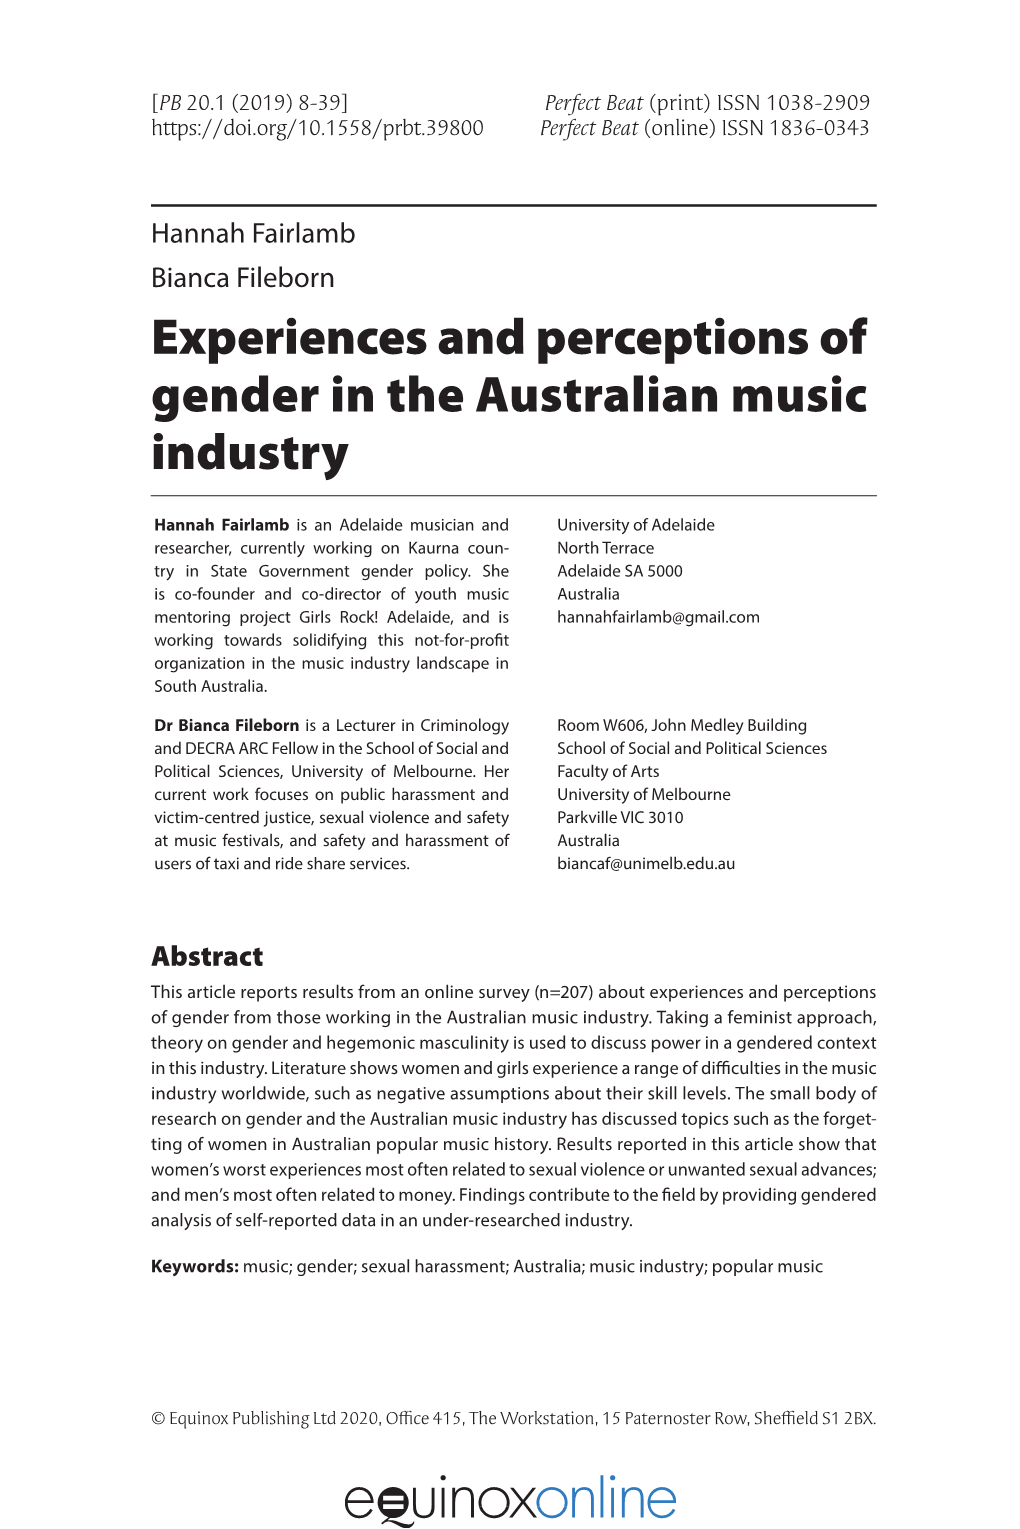 Experiences and Perceptions of Gender in the Australian Music Industry